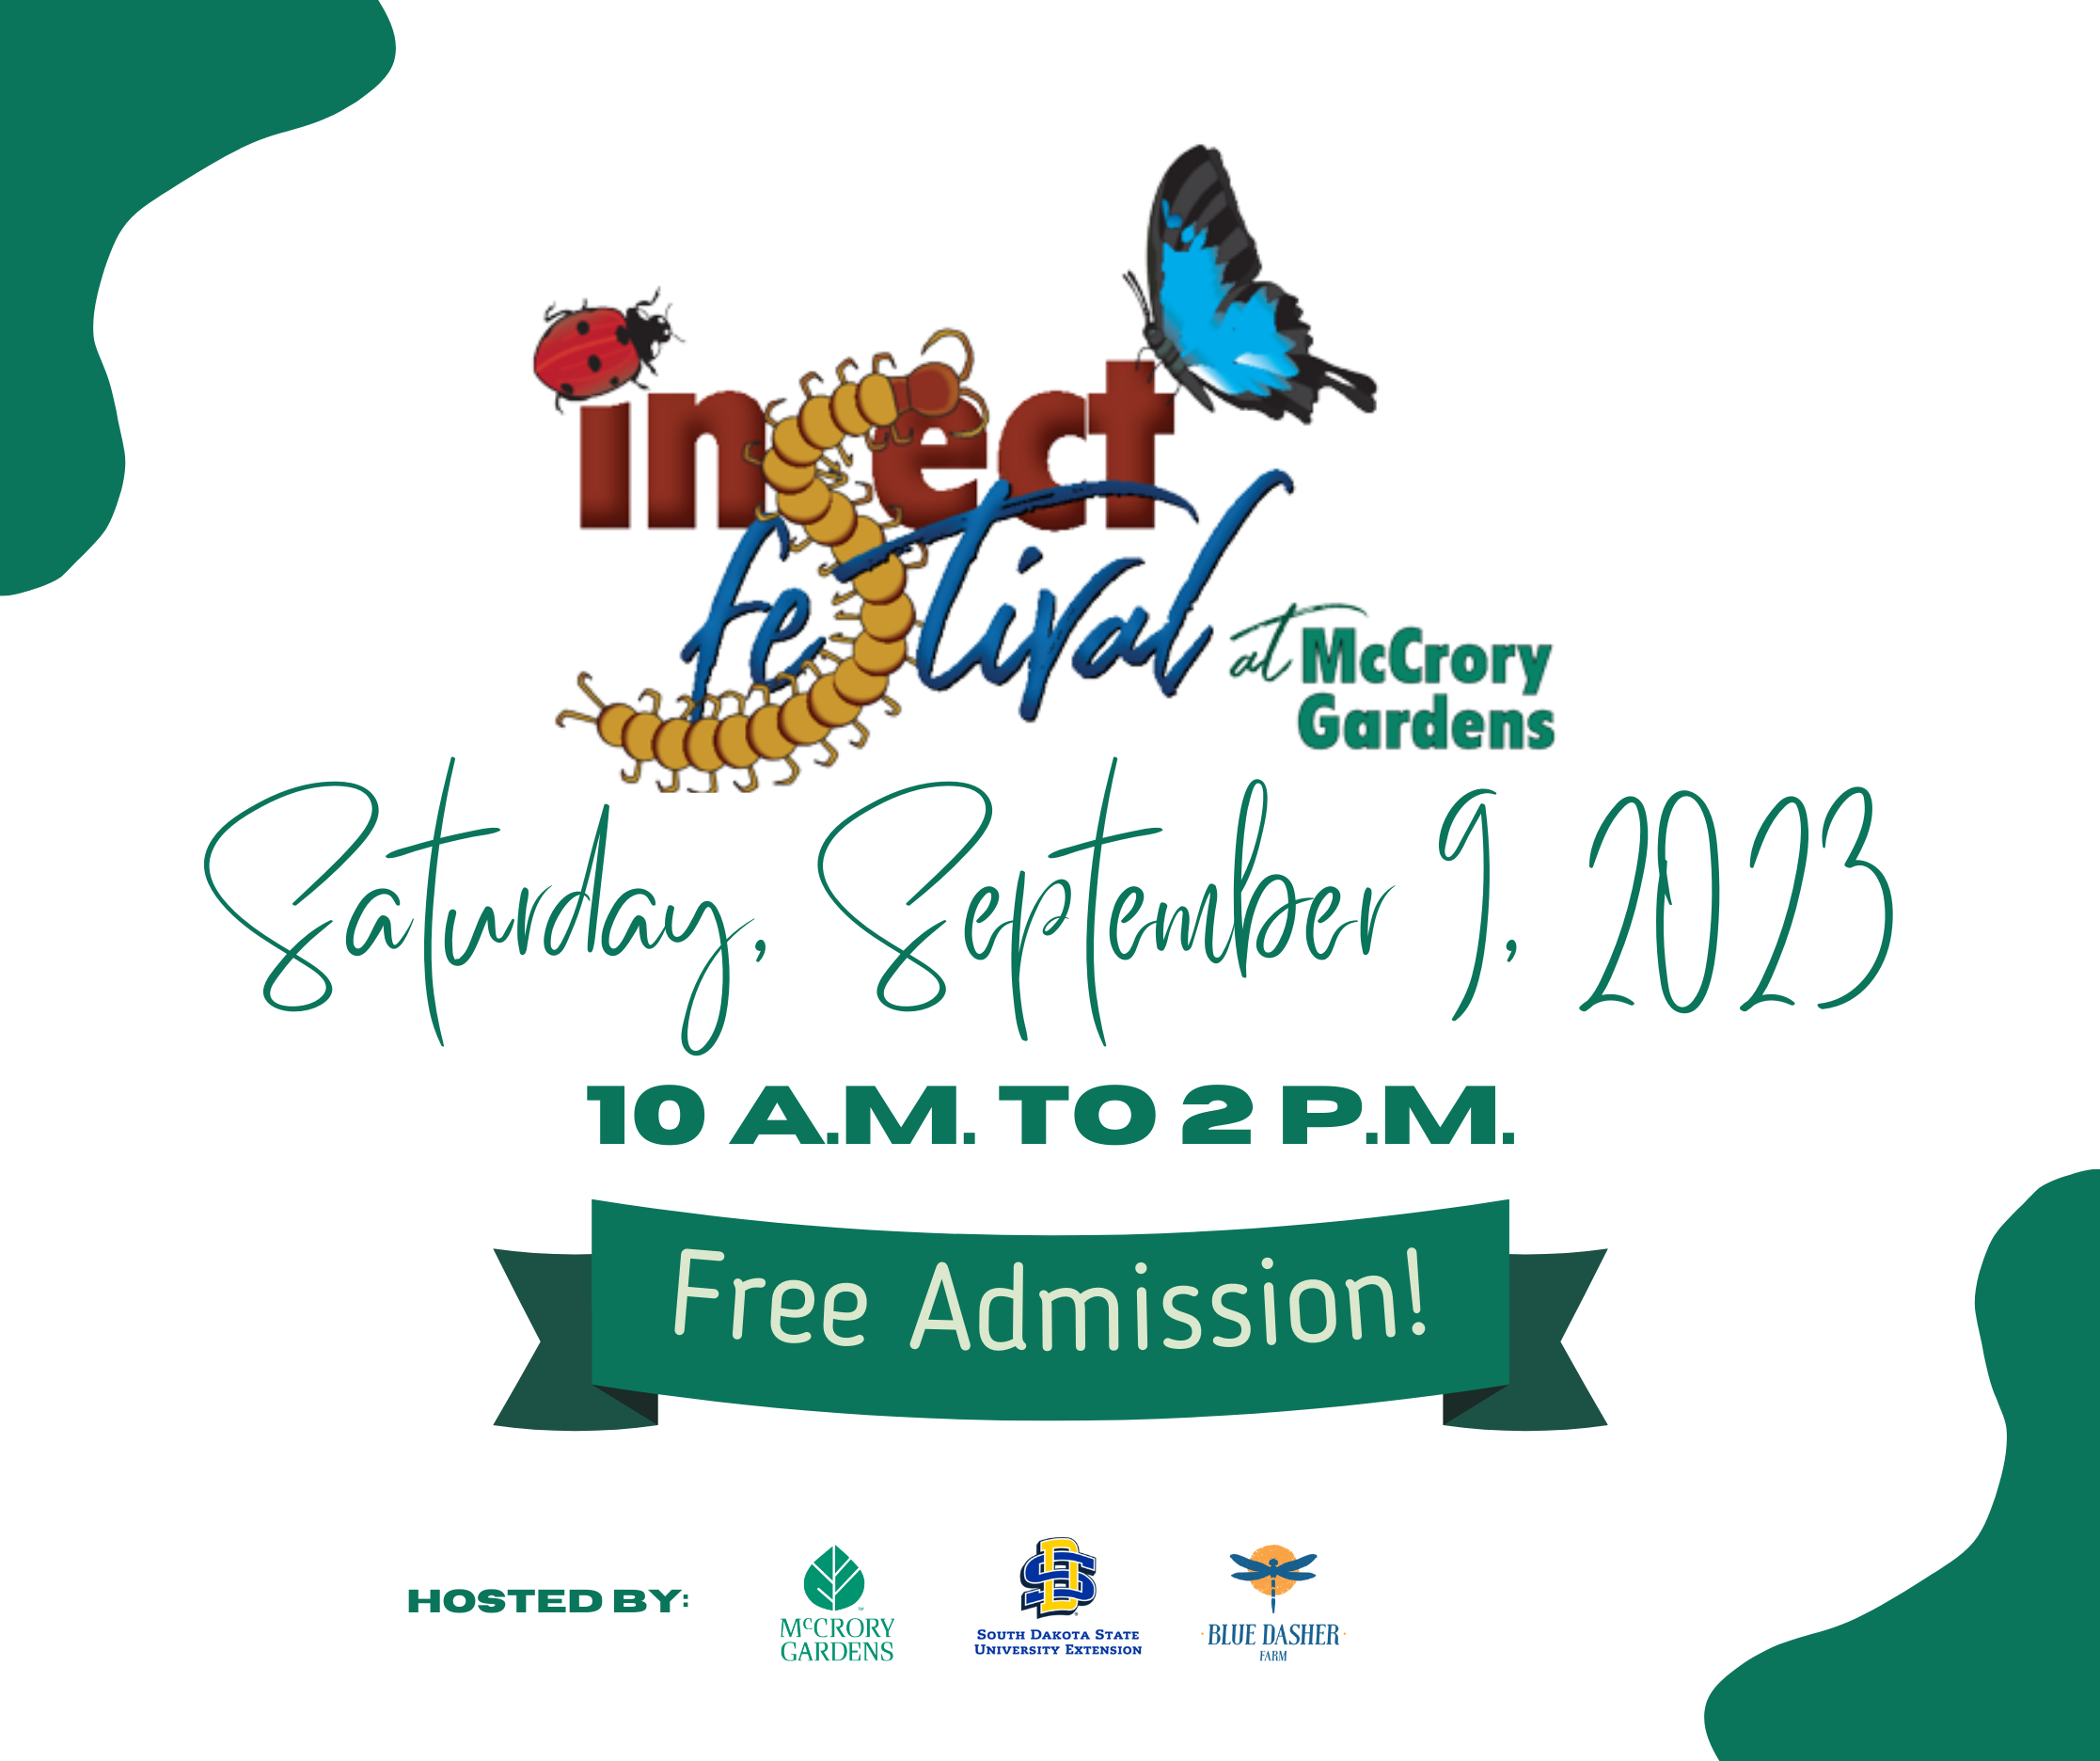 Insect Festival